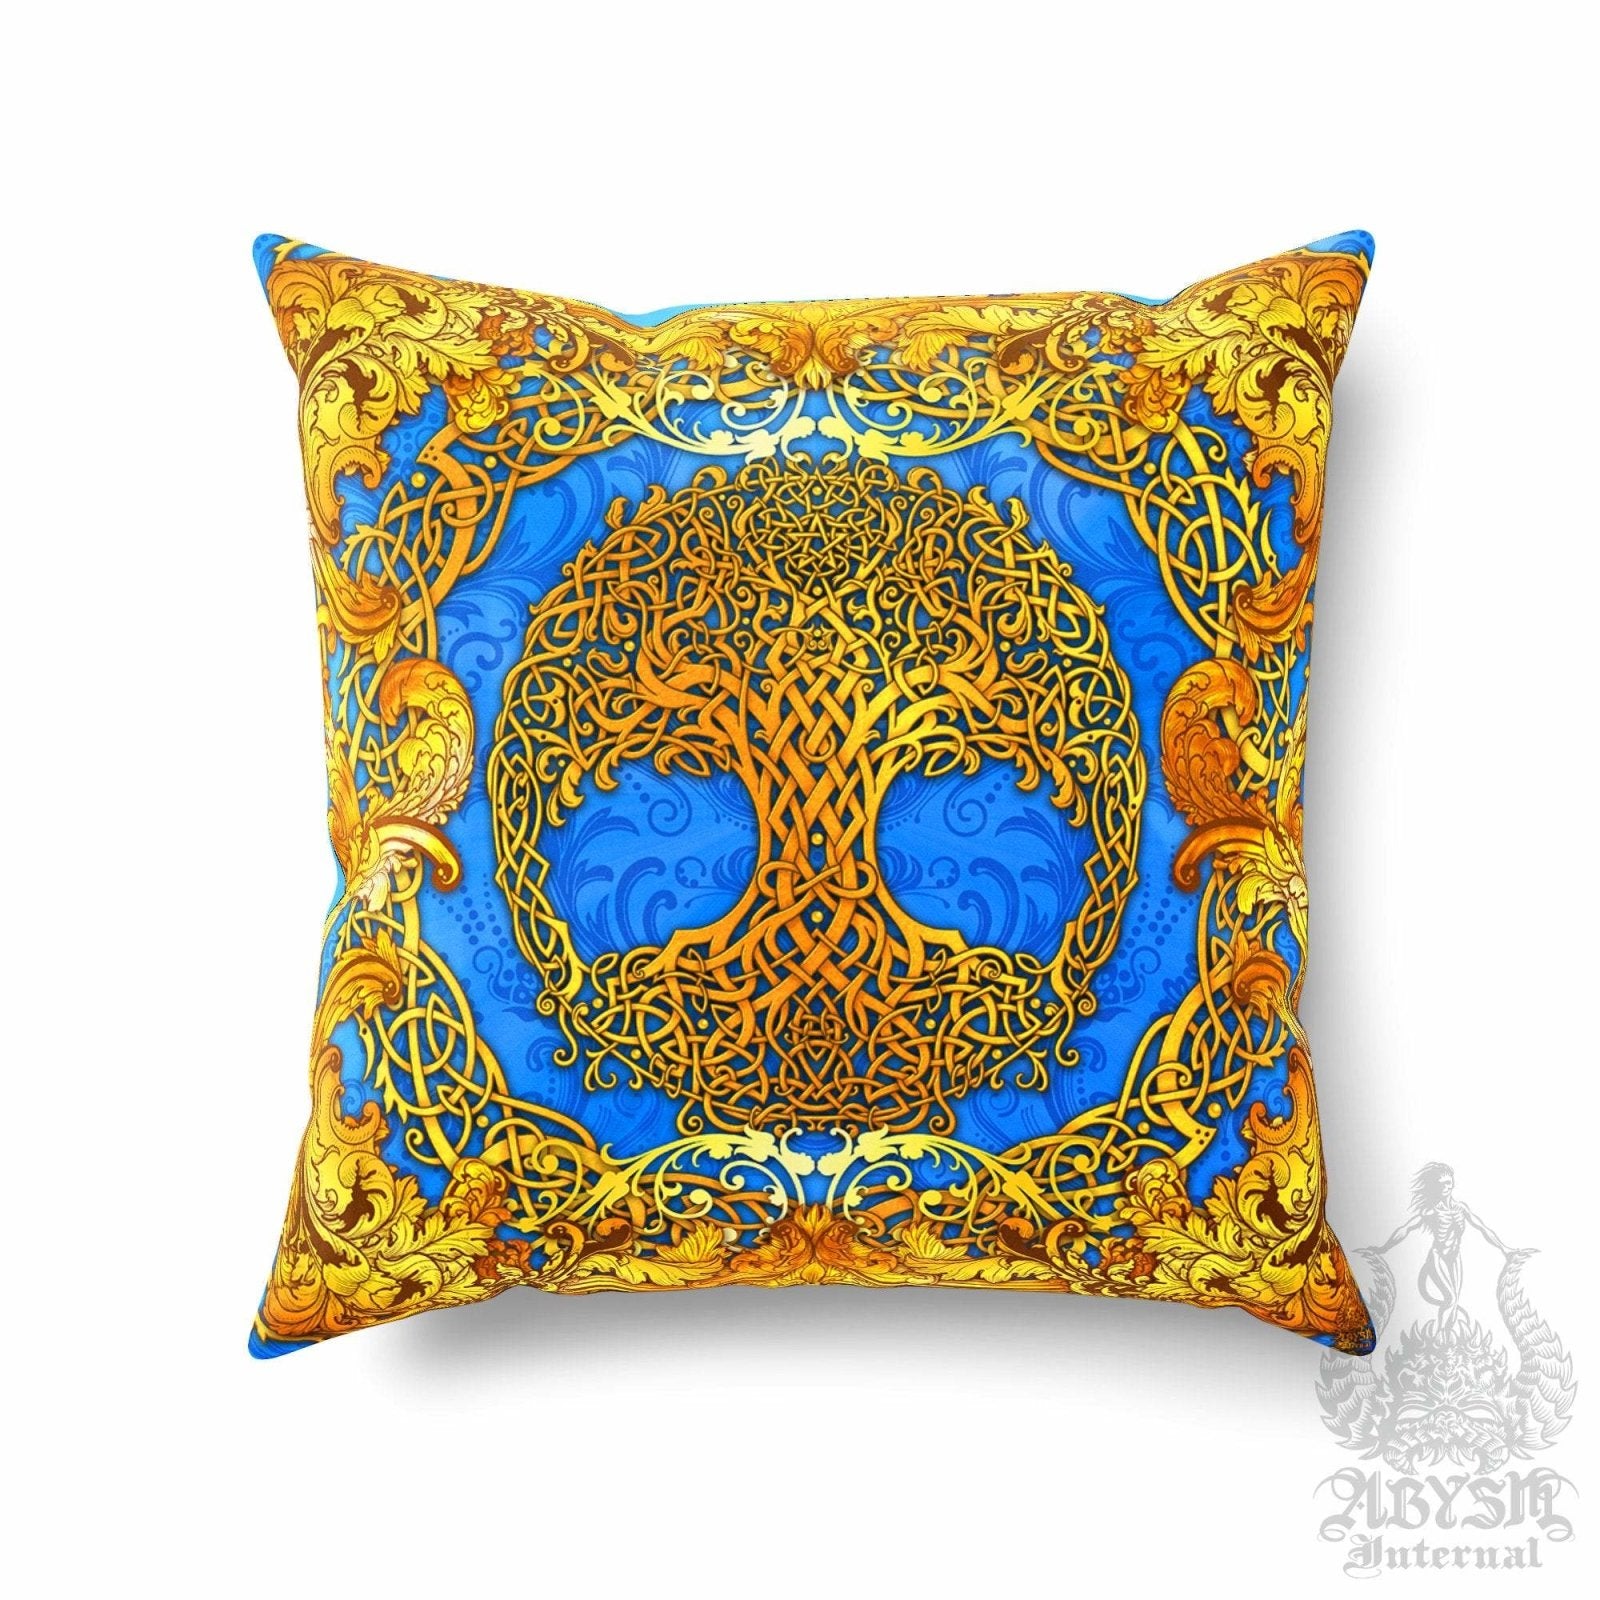 Celtic Throw Pillow, Decorative Accent Cushion, Tree of Life, Pagan Room Decor, Witchy Art, Funky and Eclectic Home - Cyan & Gold - Abysm Internal